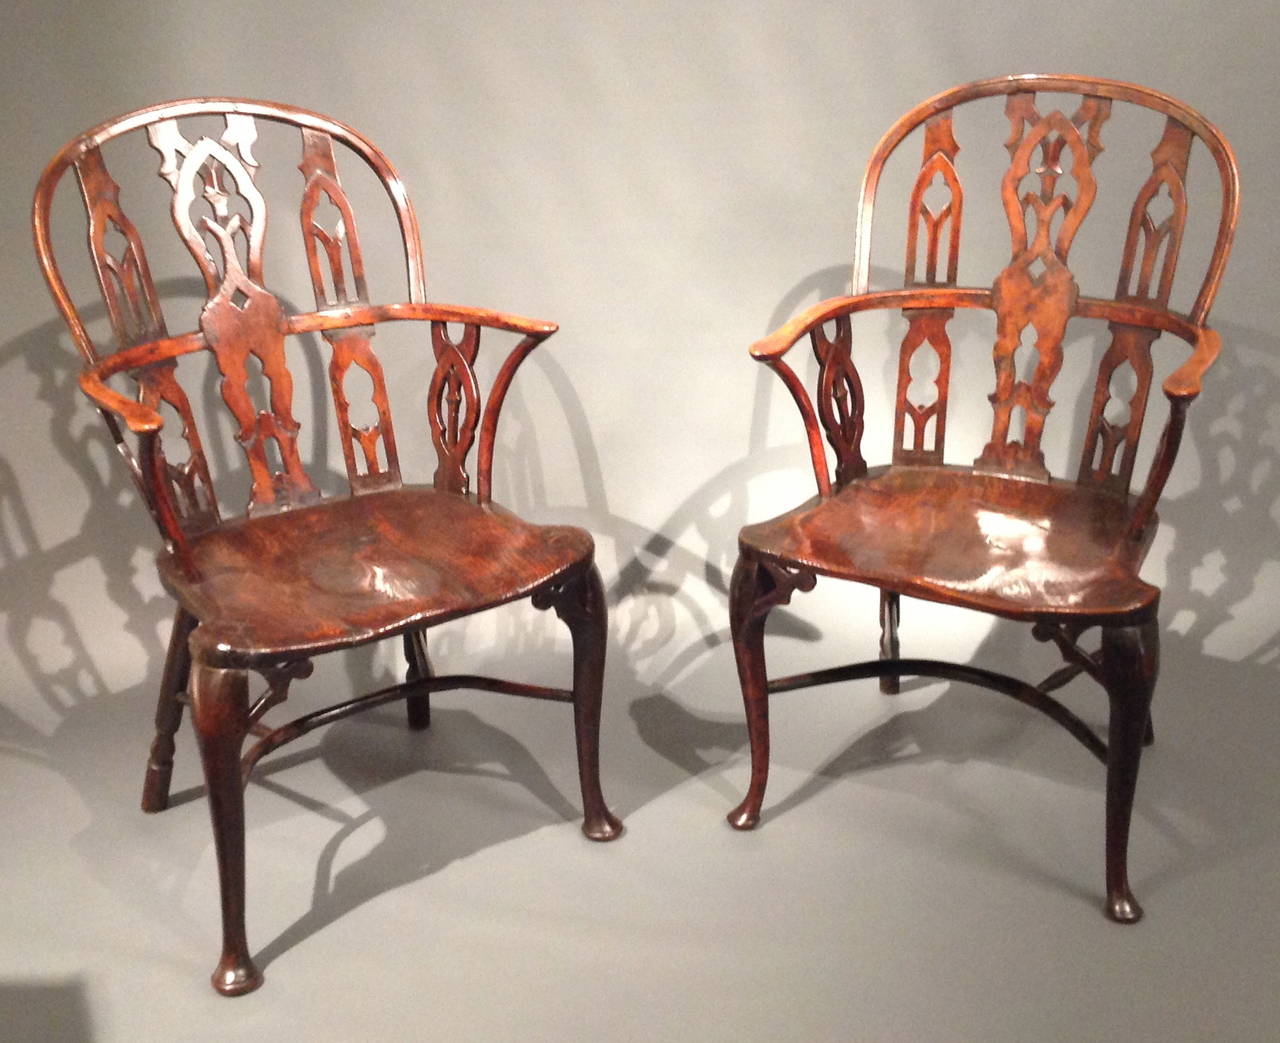 A fine and rare pair of 18th Century yew wood gothic Windsor armchairs having hoop top rails over pierced splats with gothic tracery designs with hoop arms, deeply saddled elm seats over turned rear and cabriole front legs with pierced gothic arch